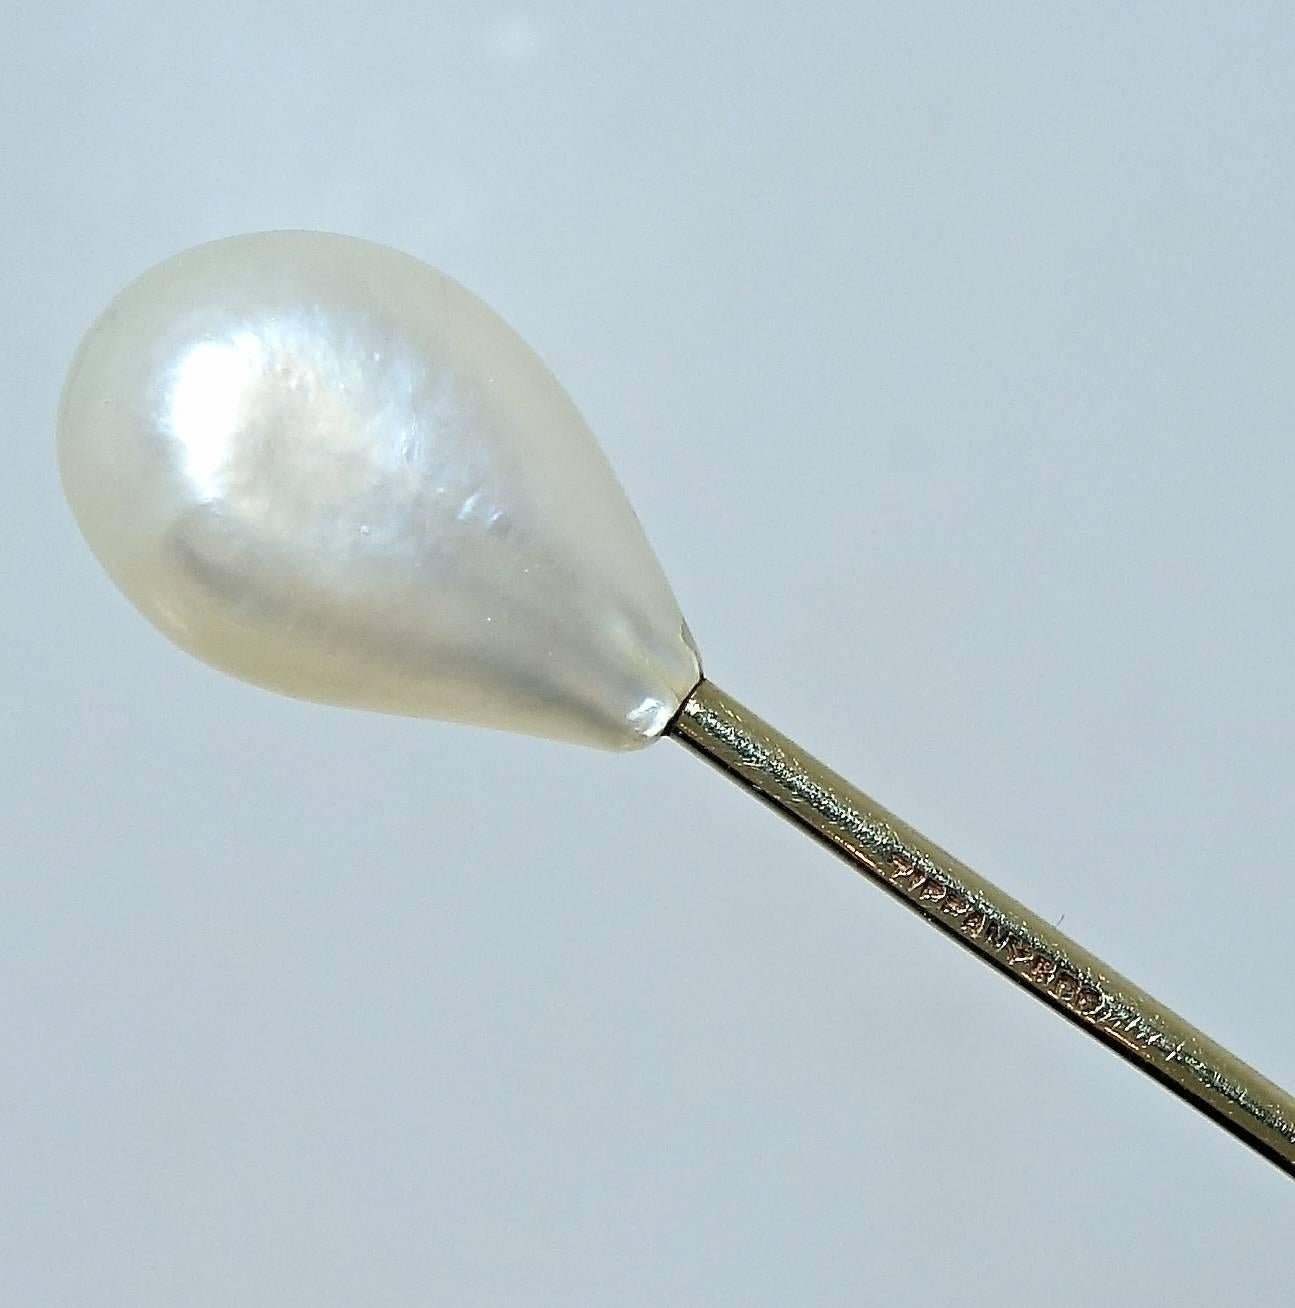 Natural oriental pearl - certified- with smooth skins and deep nacre. 12.45 mm by 8.3 mm.  18K  Antique stickpin by Tiffany & Co.